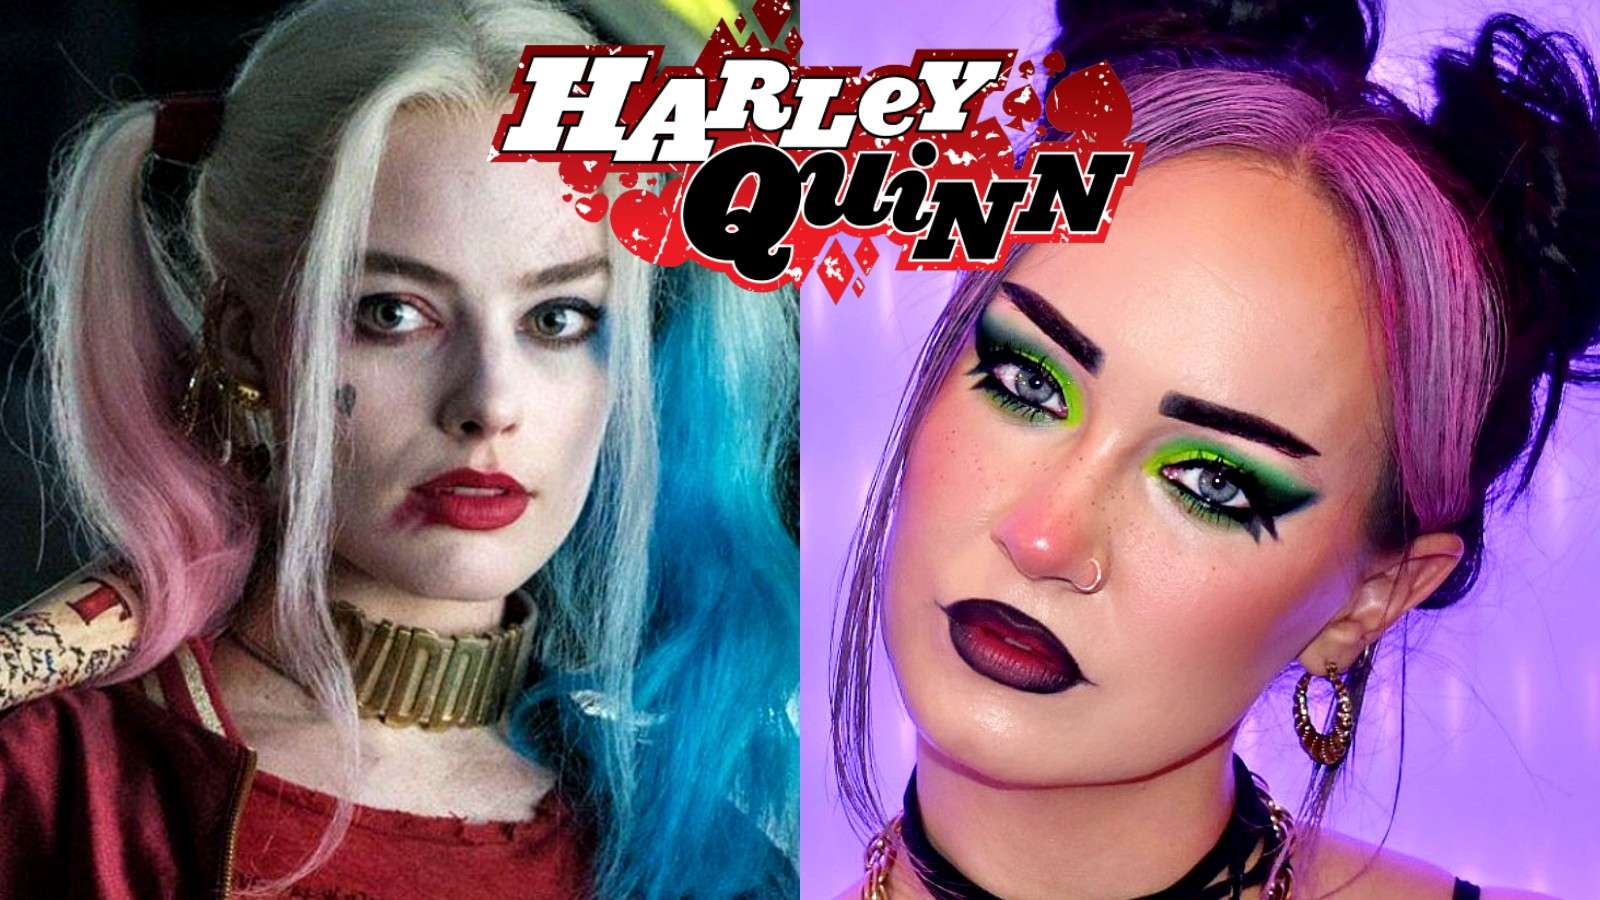 Cosplayer Marina Eloise next to image of Harley Quinn